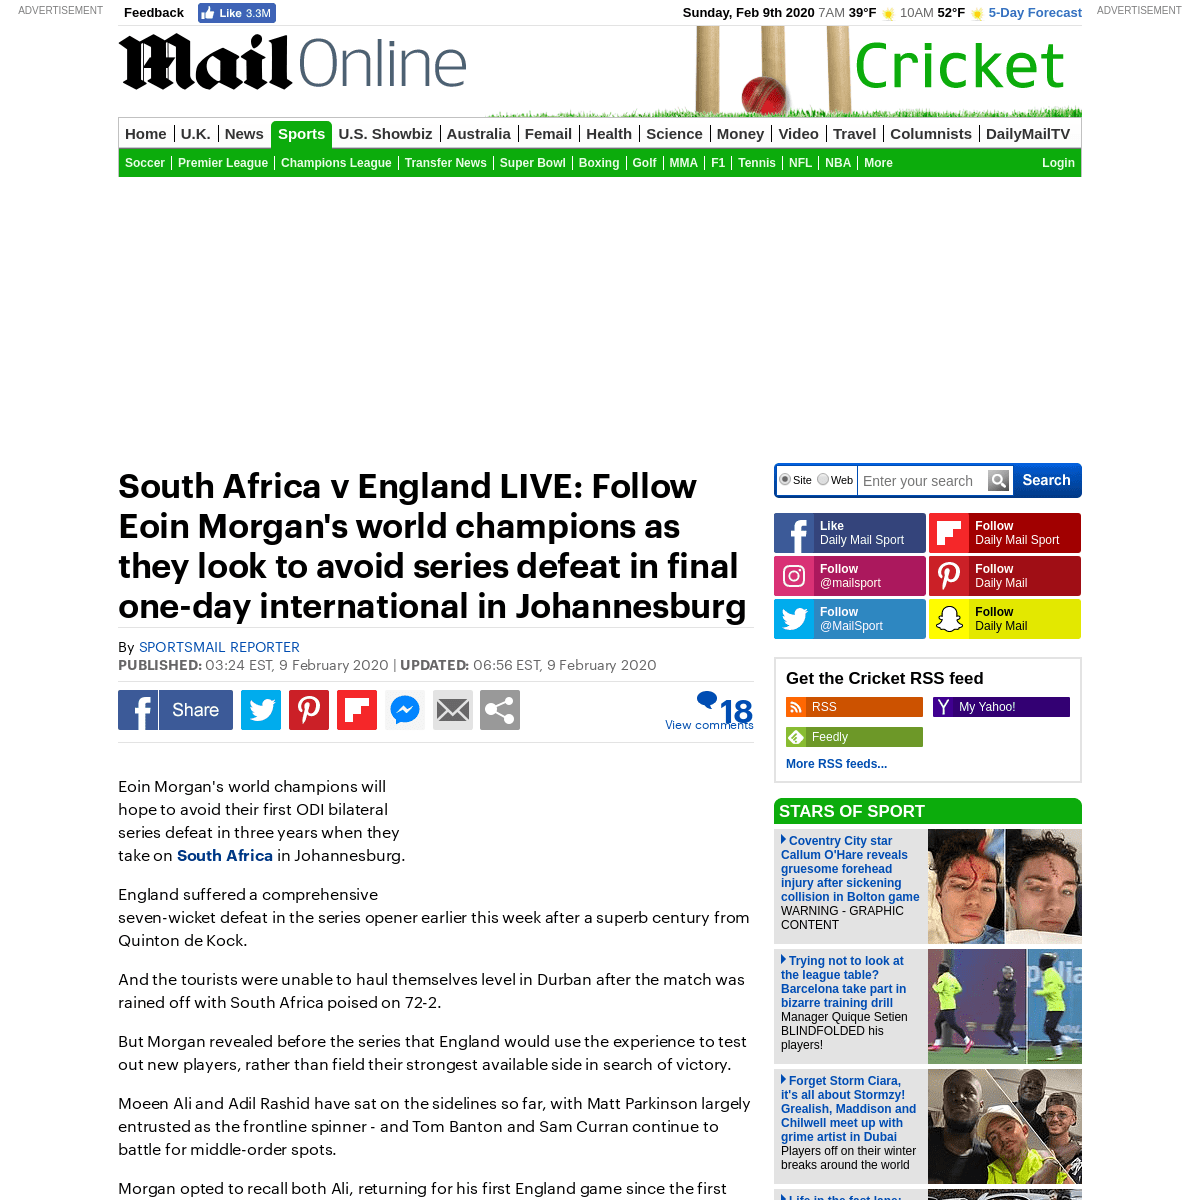 A complete backup of www.dailymail.co.uk/sport/cricket/article-7983333/South-Africa-v-England-LIVE-Eion-Morgans-world-champions-